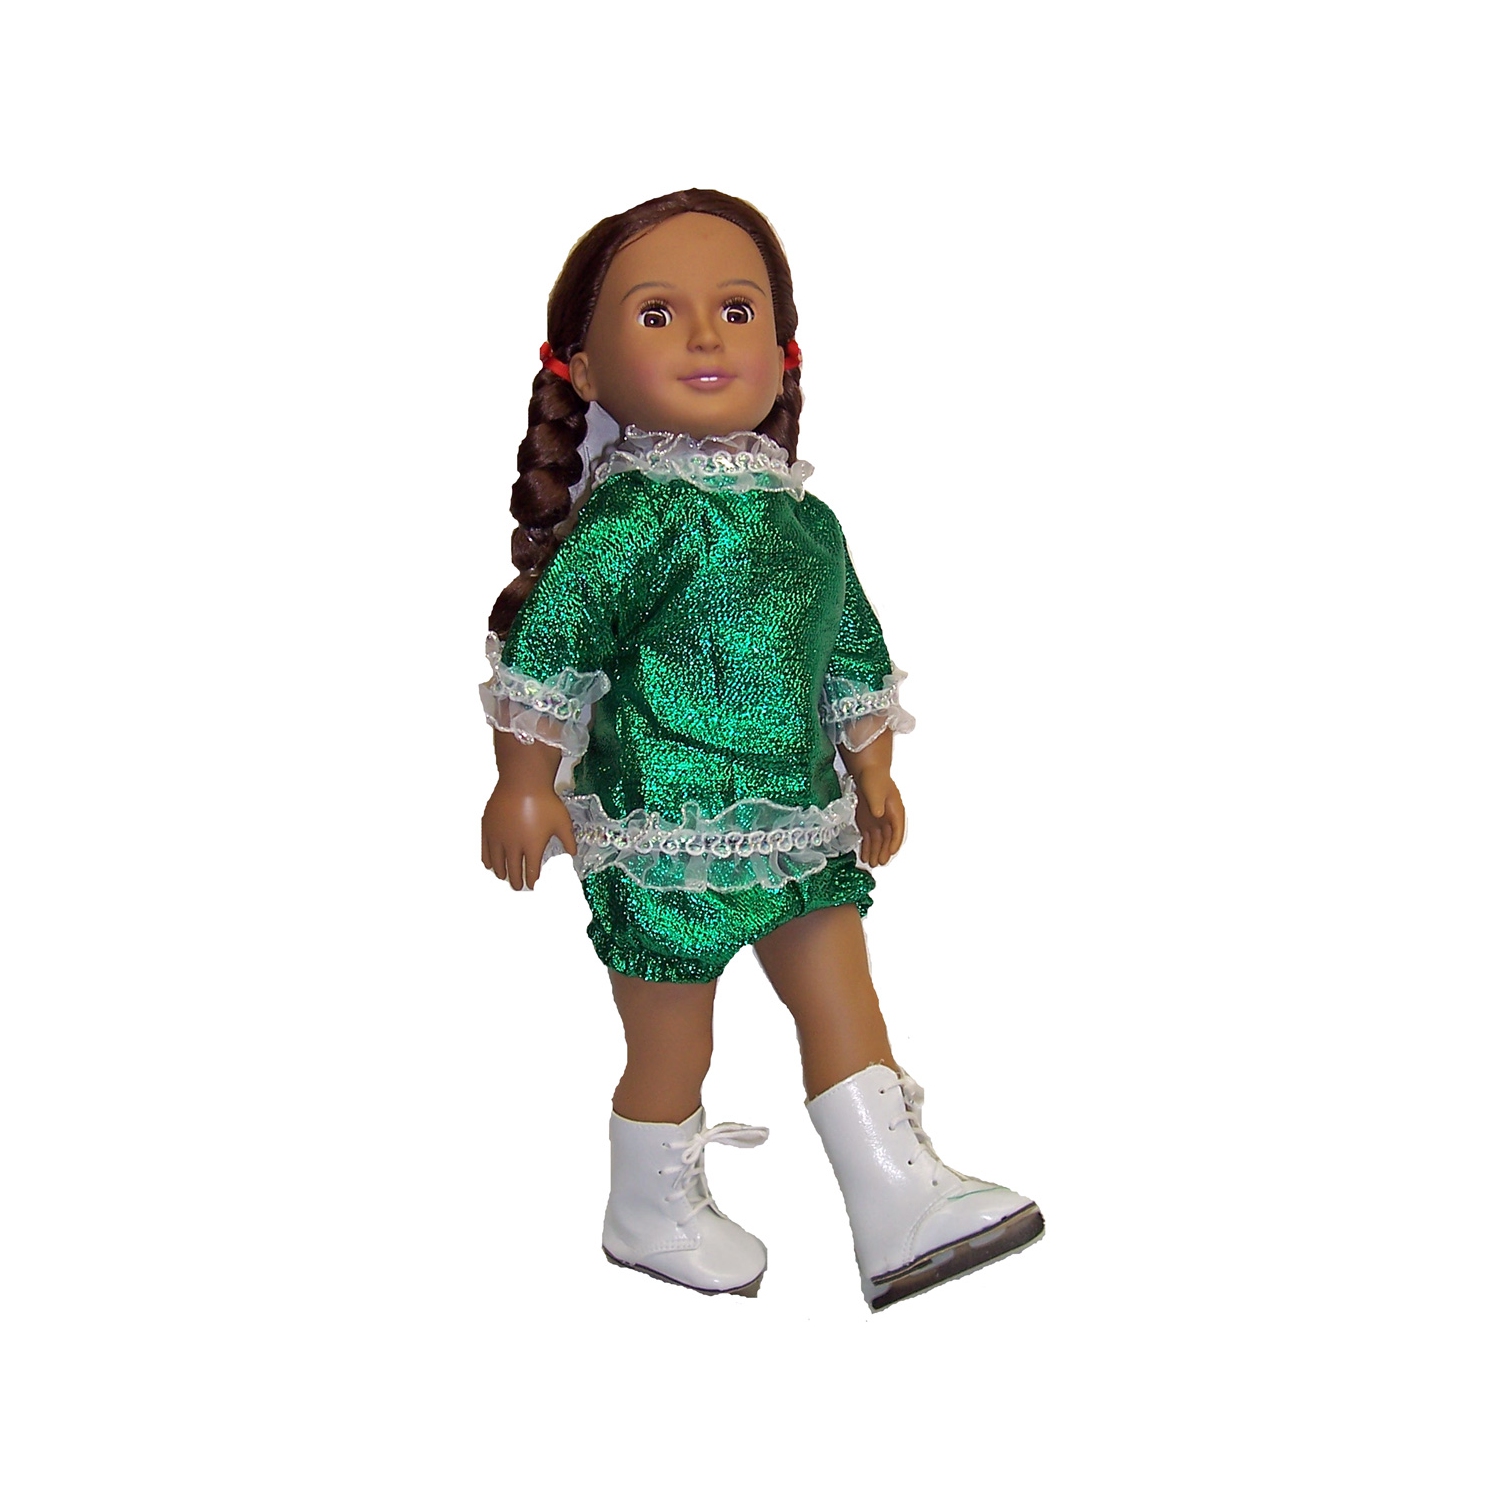 Doll Clothes Superstore Green Metallic Ice Skating Outfit For 18 Inch Dolls Like Our Generation American Girl My Life Dolls